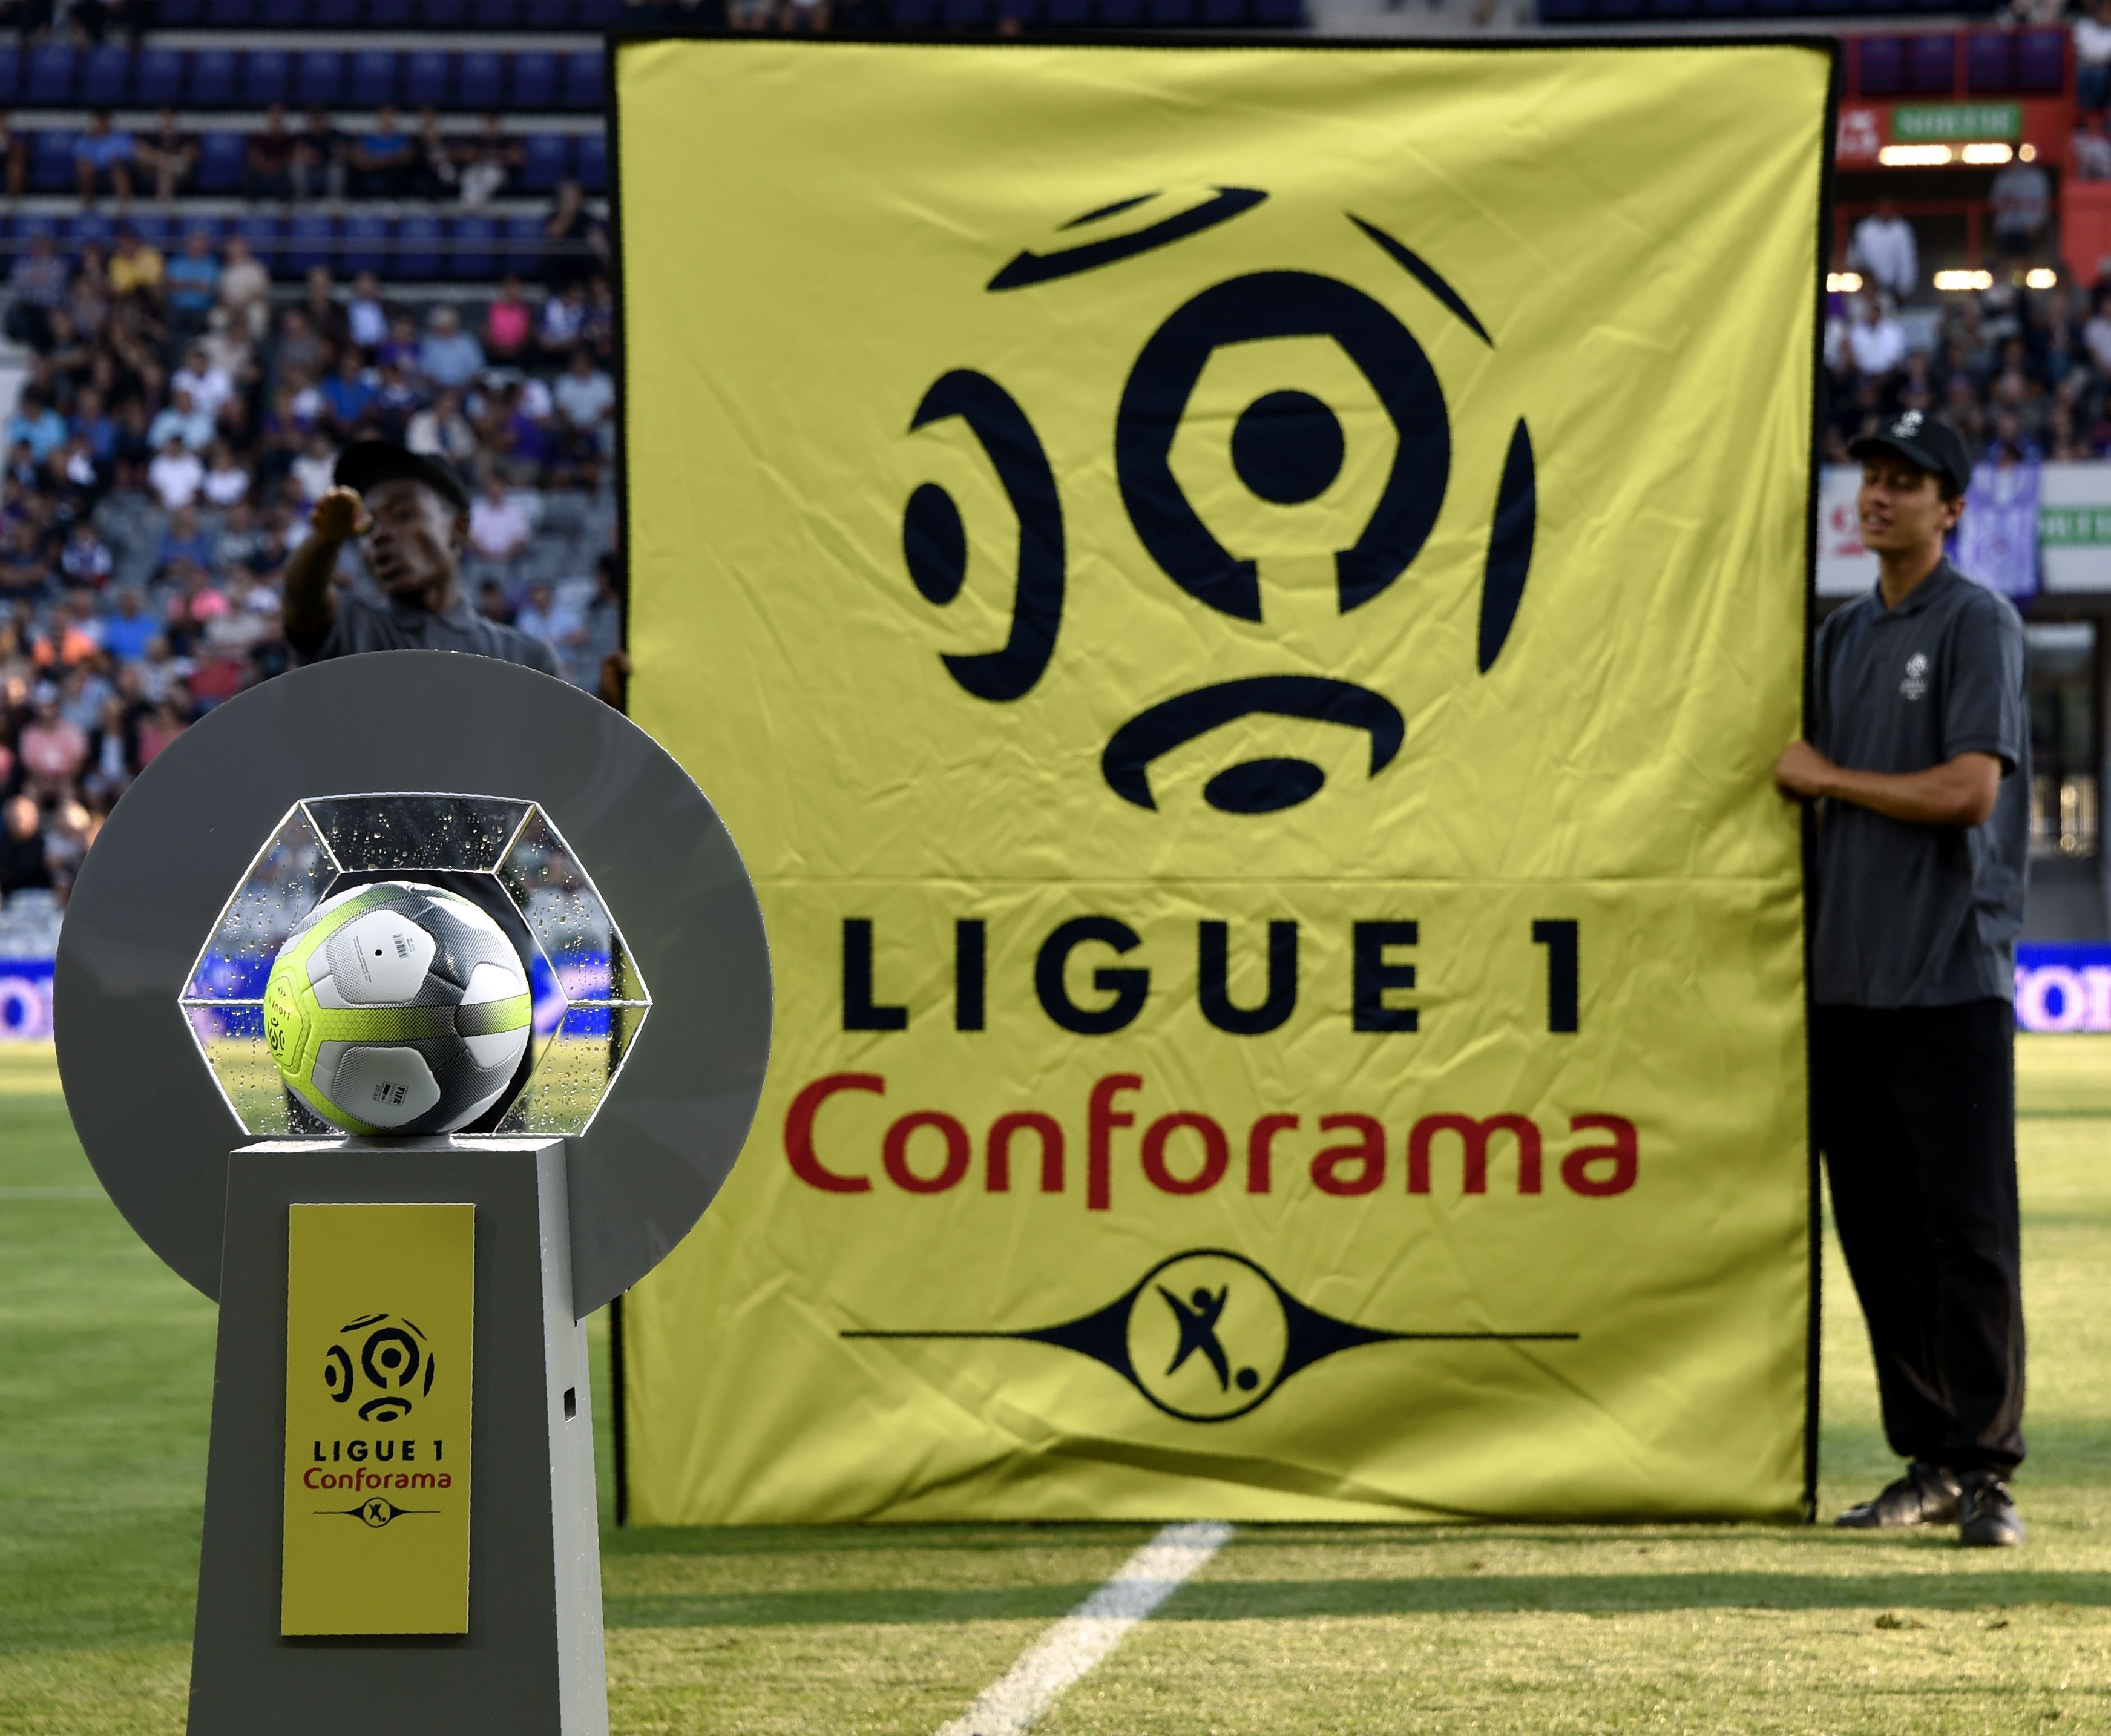 The new sponsor logo "Ligue 1 - Conforama" is installed next to the new official ball, prior to the French Ligue 1 football match between Toulouse and Montpellier at the Municipal Stadium in Toulouse, southern France, on August 12, 2017.  / AFP PHOTO / PASCAL PAVANI        (Photo credit should read PASCAL PAVANI/AFP/Getty Images)